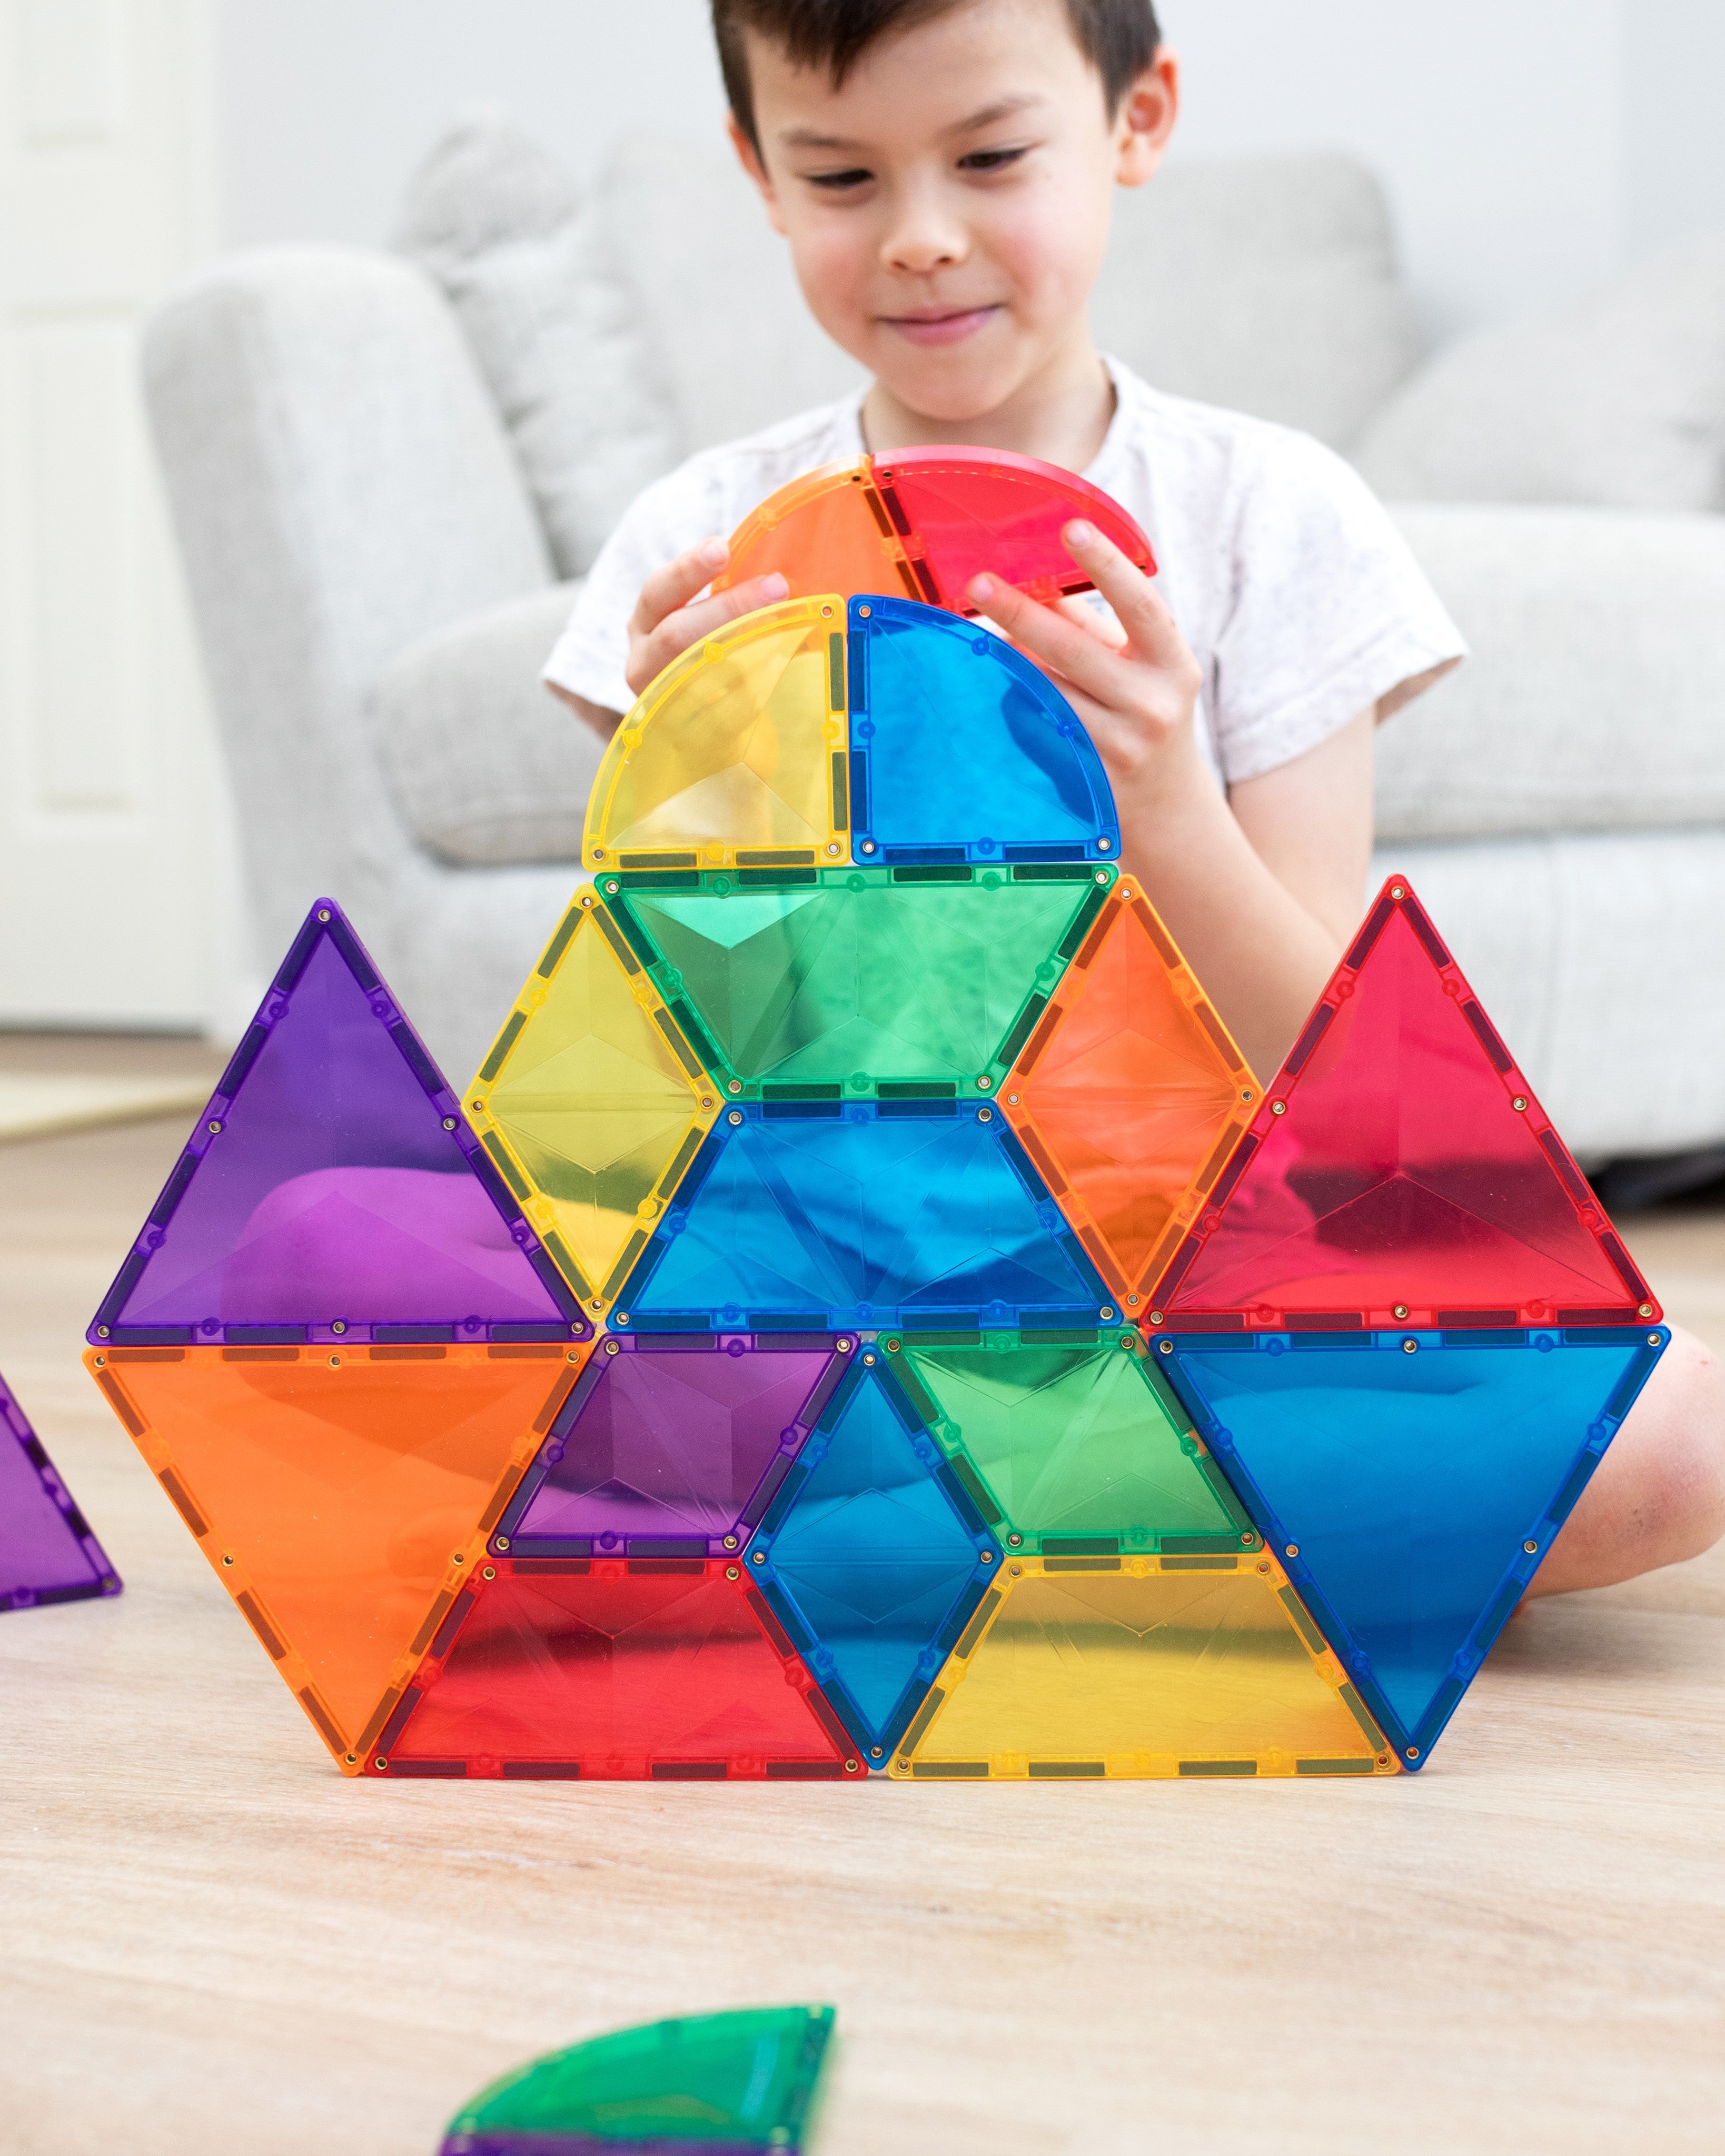 Connetix Tiles - Award winning STEAM approved educational magnetic